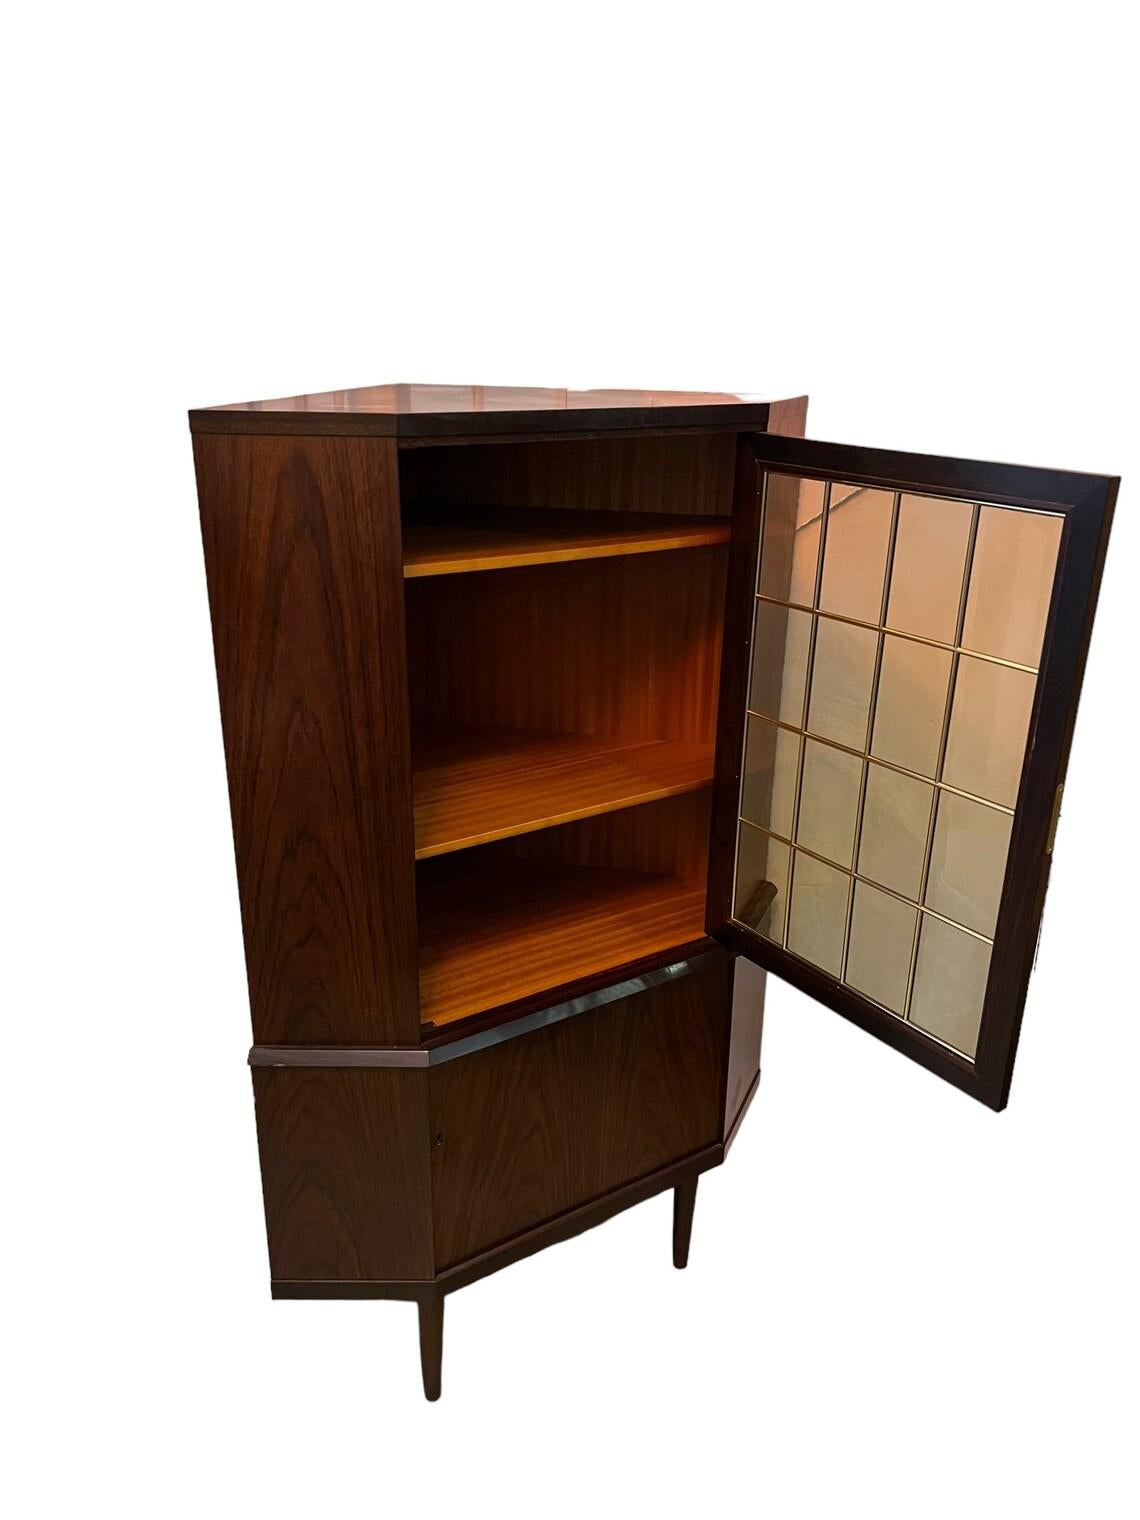 Mid Century Rosewood, Danish corner cabinet with glass doors, adjustable shelving on the top and the bottom sturdy and heavy very good condition 1960 Circa.
Dimensions: W 34